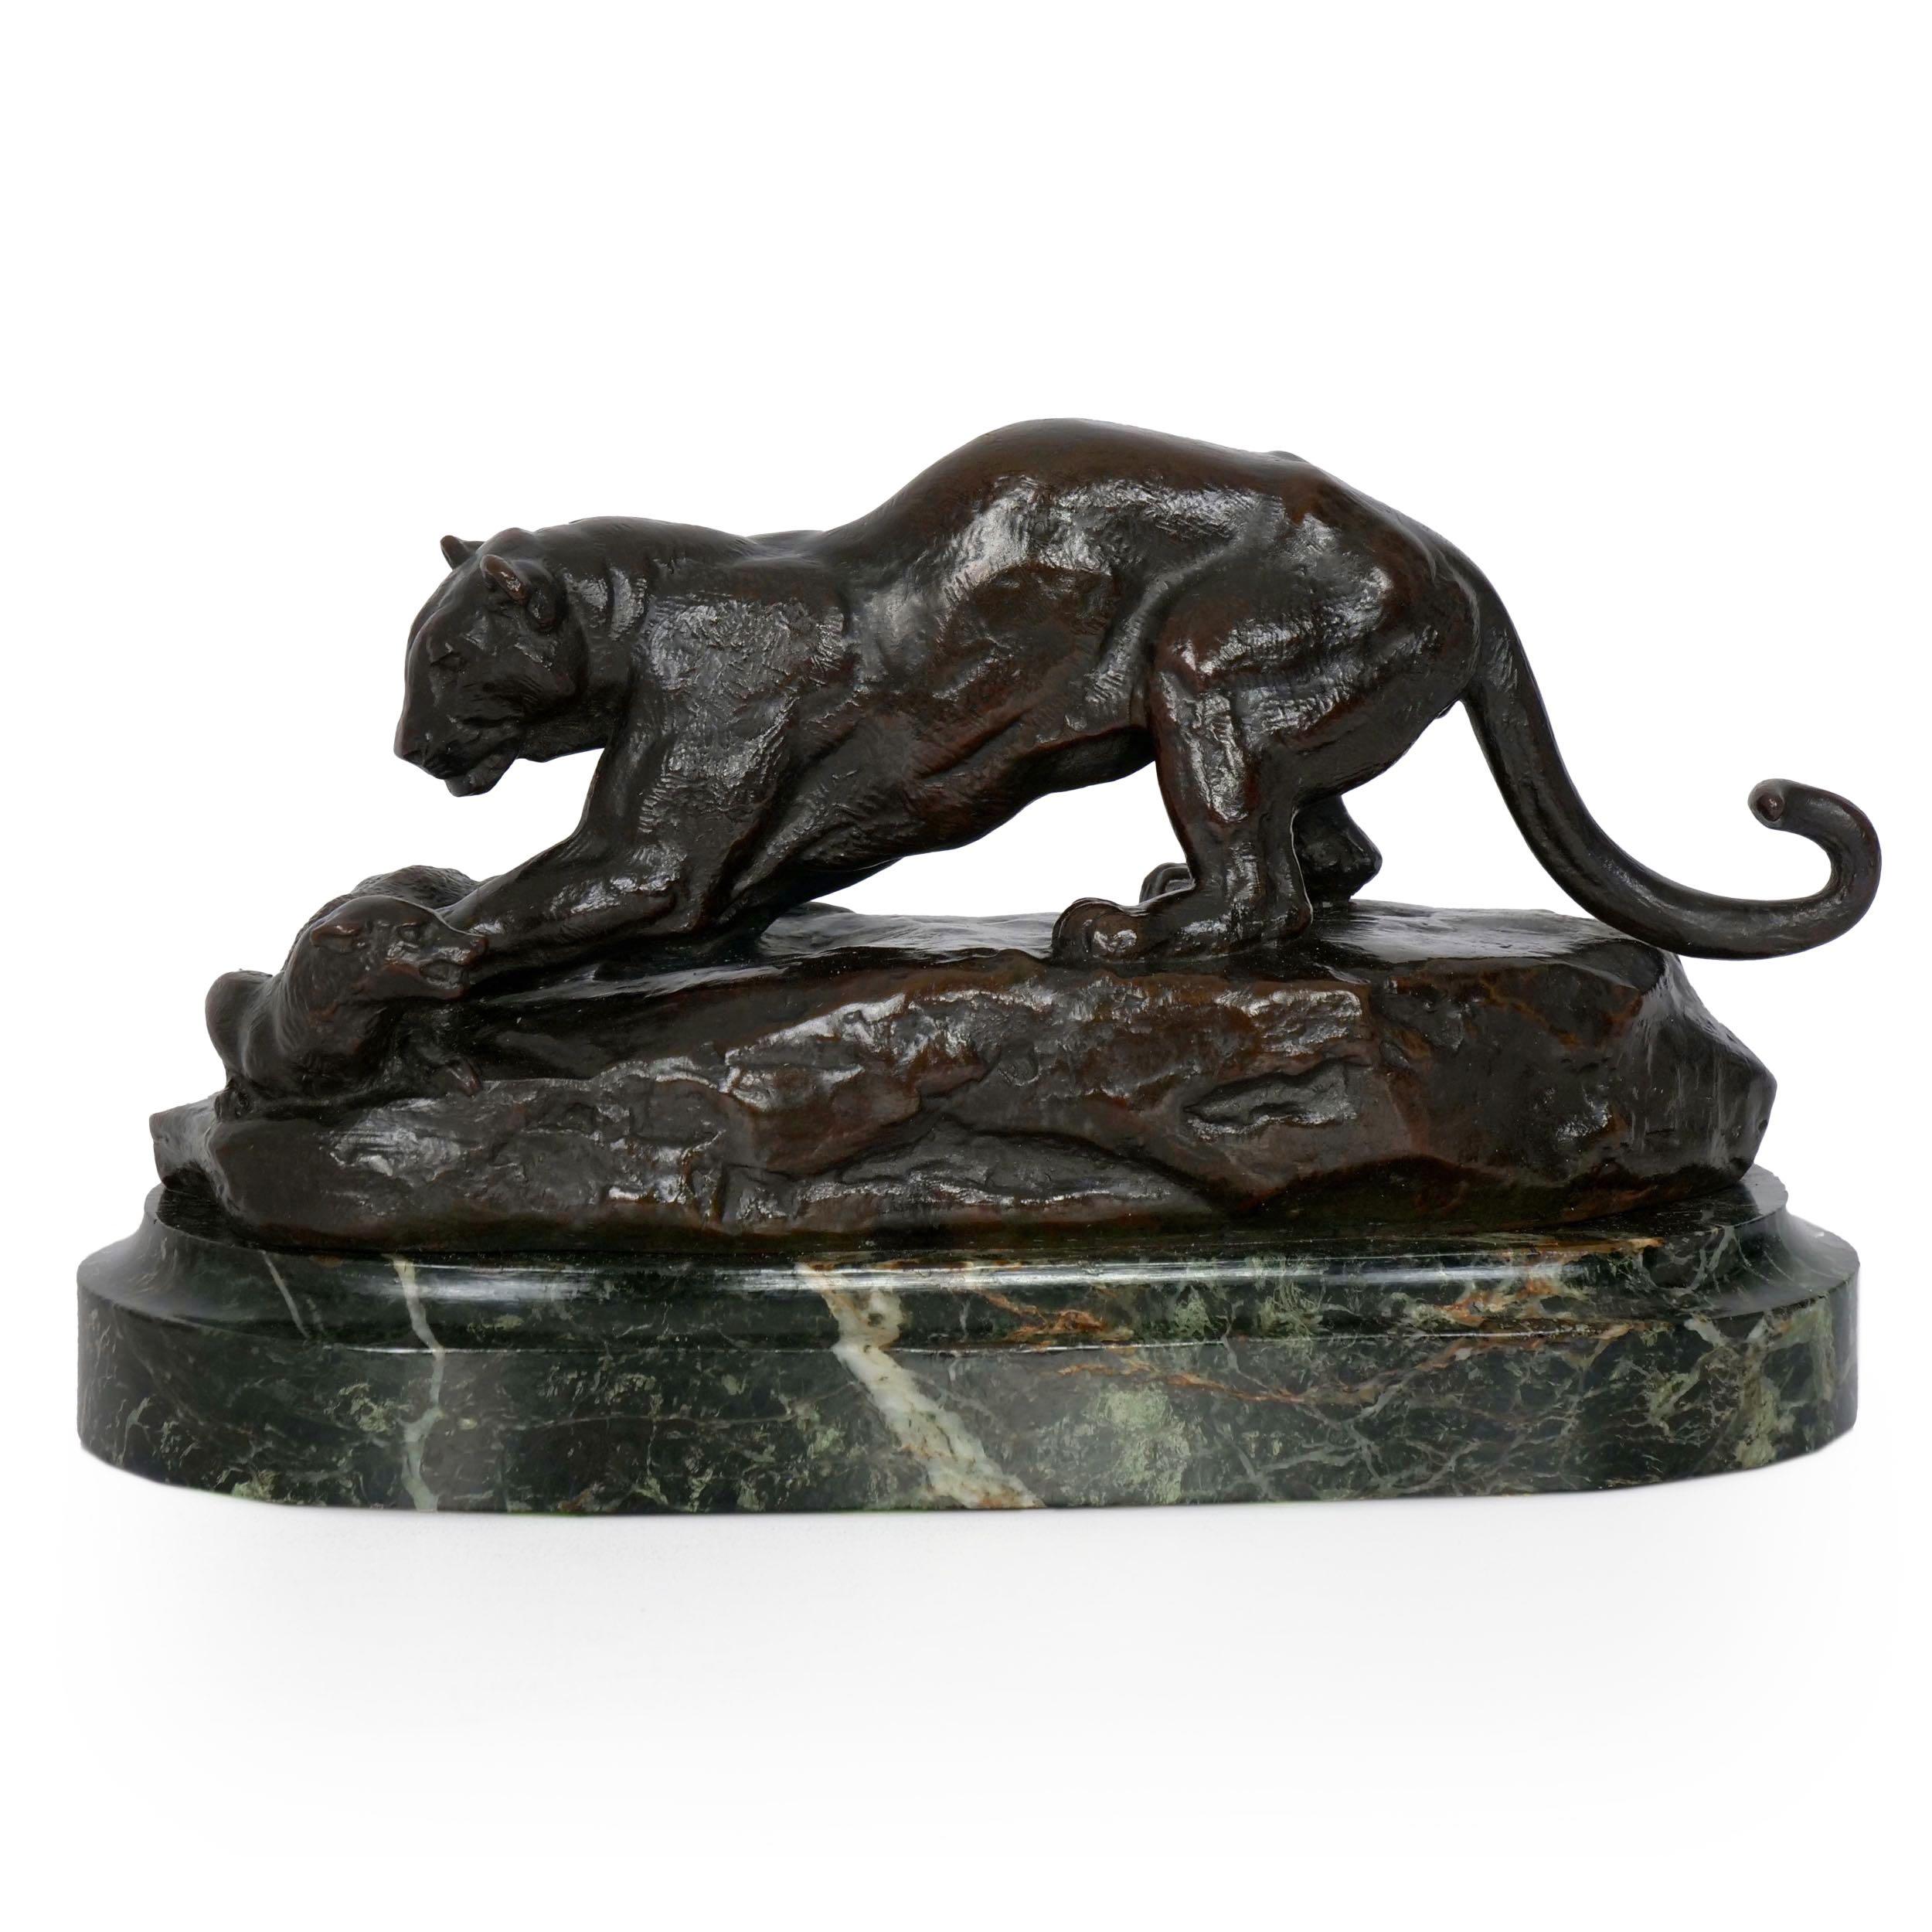 A rare and exquisite cast that has not been on the market since it was acquired by a private collector in 1935, this exquisite model of Panthère suprenant un zibeth (Panther attacking a civet cat) depicts the large beast pawing at the snarling cat